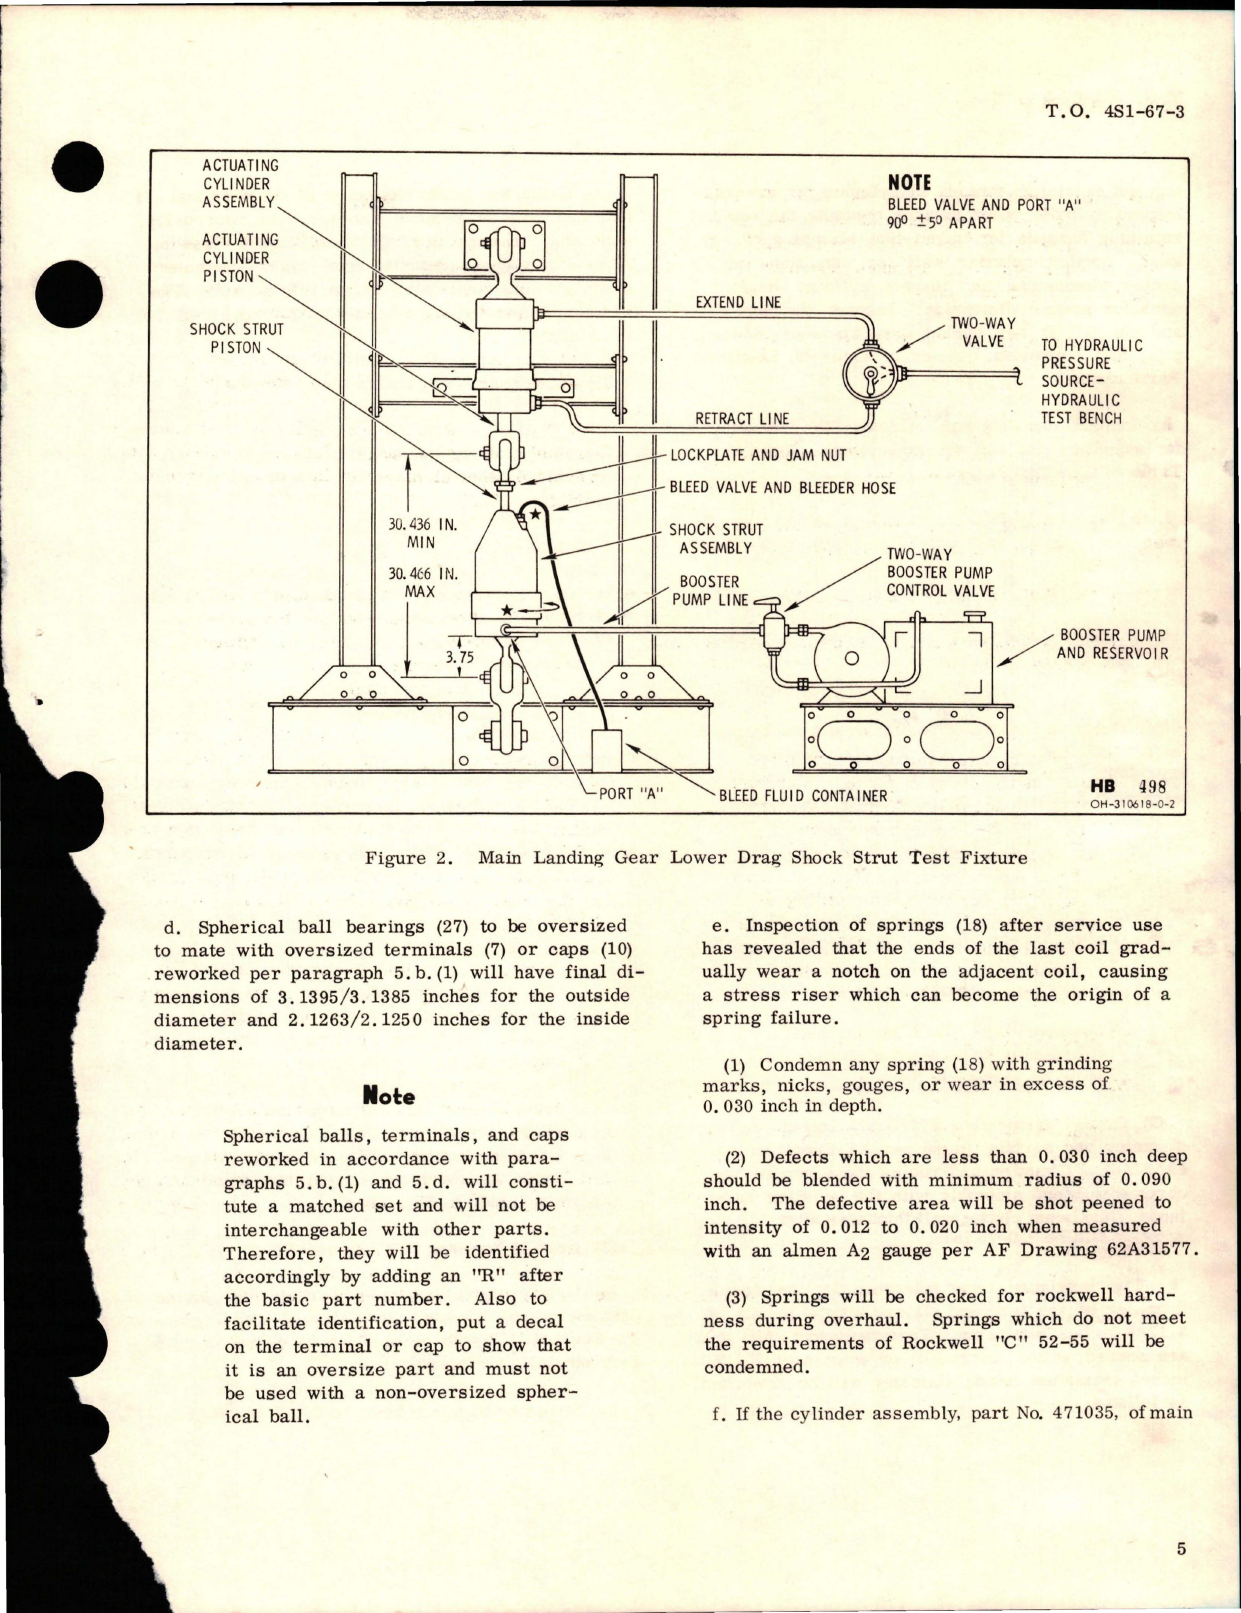 Sample page 5 from AirCorps Library document: Overhaul Instructions with Parts Breakdown for Main Landing Gear - Lower Drag Shock Strut Assembly